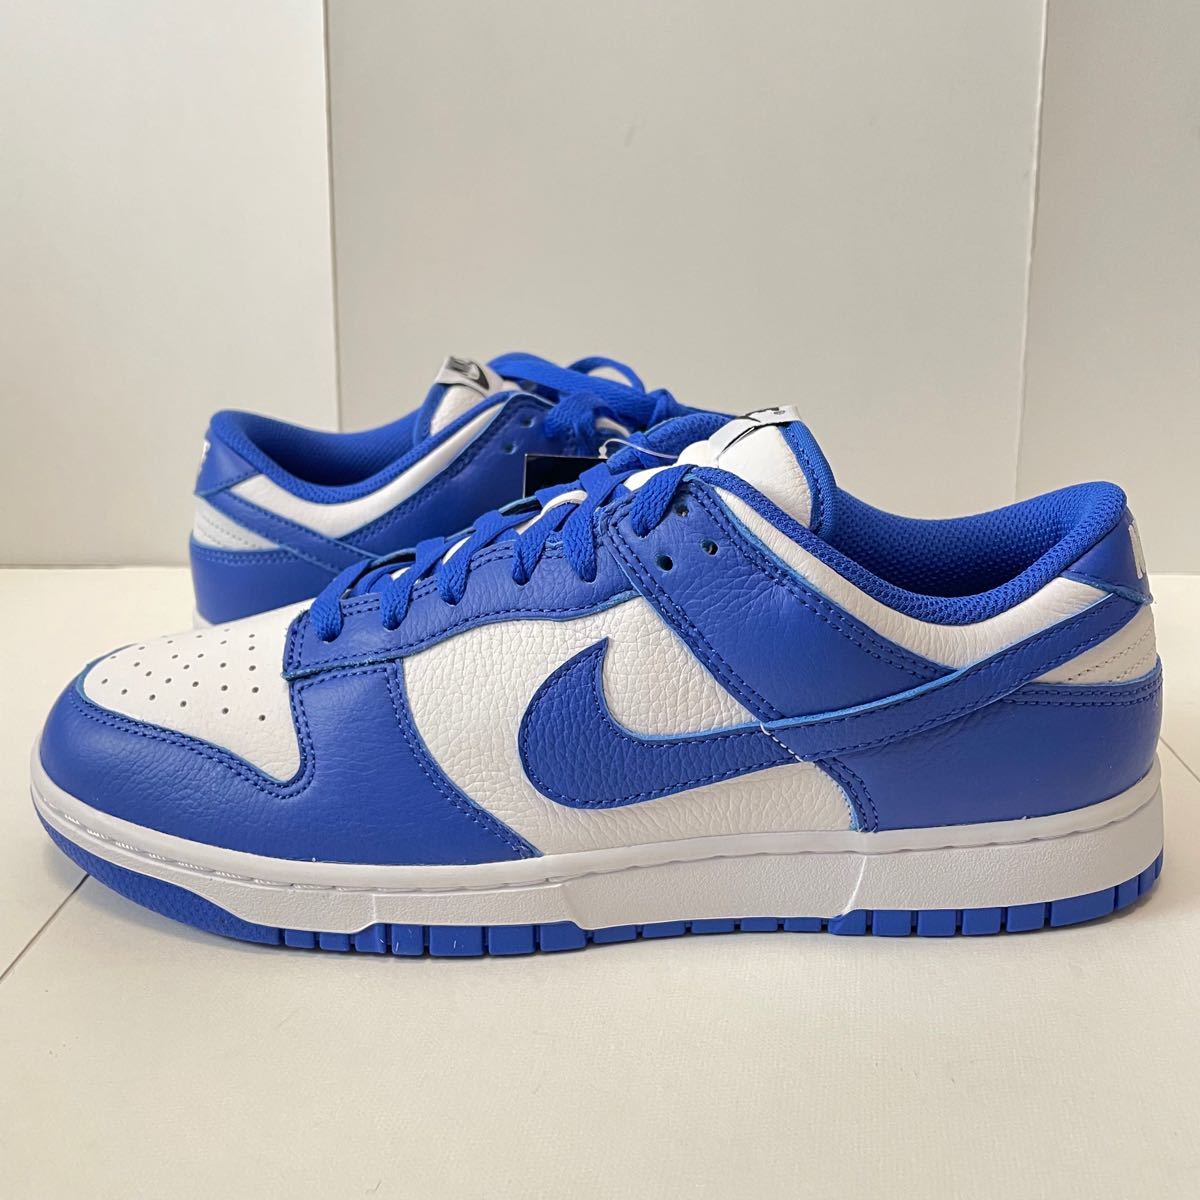 PayPayフリマ｜NIKE BY YOU DUNK LOW ナイキ バイユー ダンク ロー US9 5 27 5cm 未使用 ブルー 青